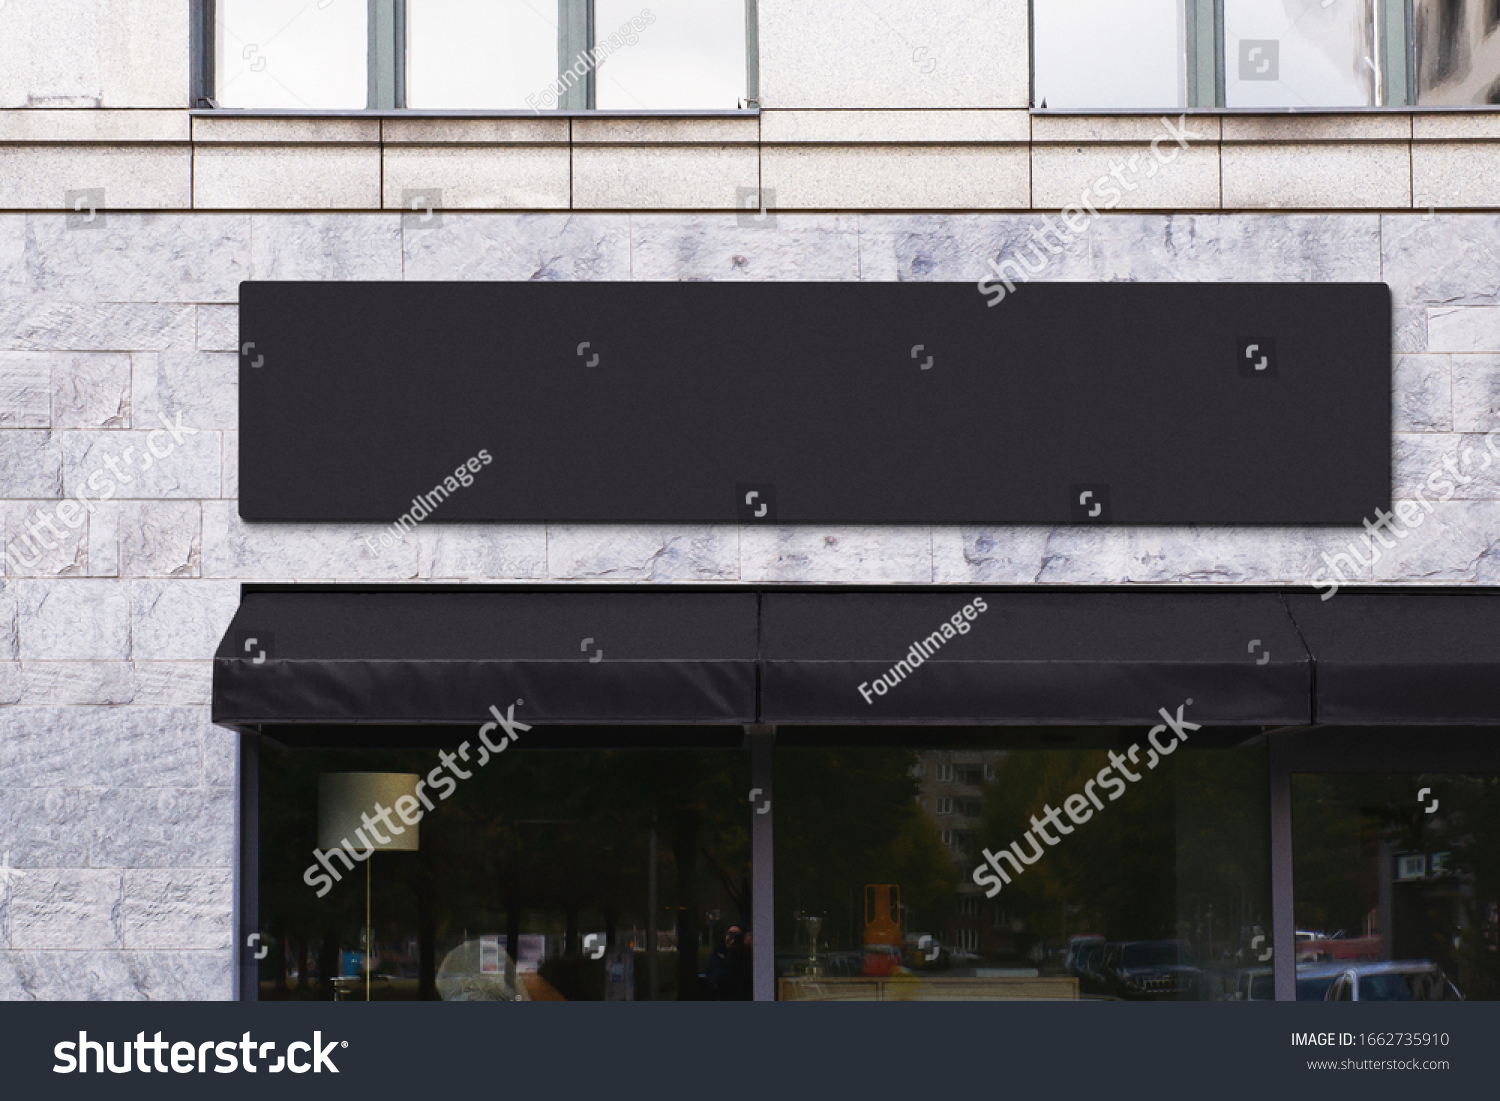 Blank store signage sign design mockup isolated, Clear shop template. Street hanging mounted on the wall. Signboard for logo presentation. Metal cafe restaurant bar plastic badge black white.  #1662735910